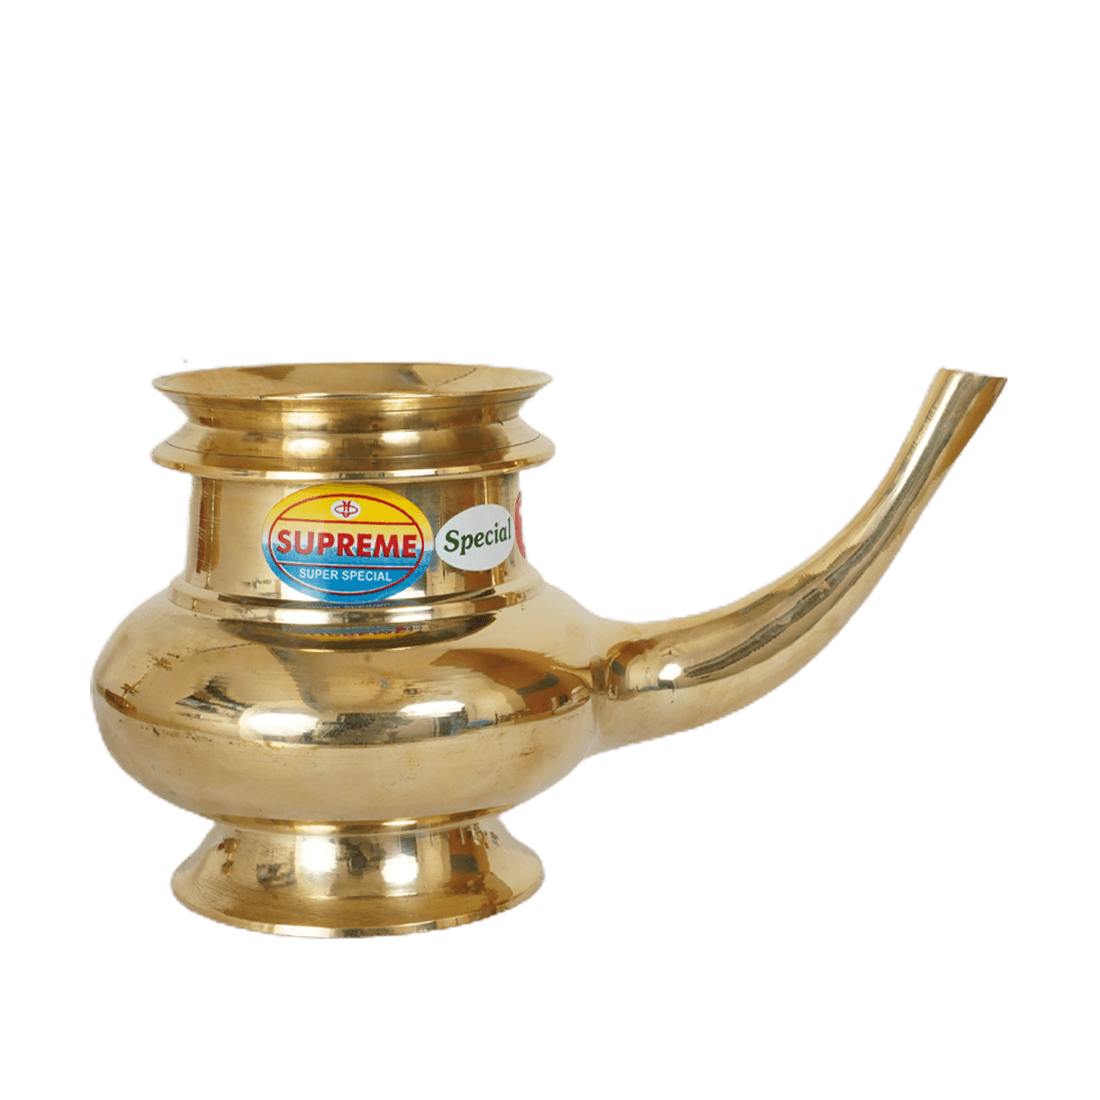 AVP Kindi White Metal For Ayurvedic treatment, Pooja and traditional rituals and ceremonies